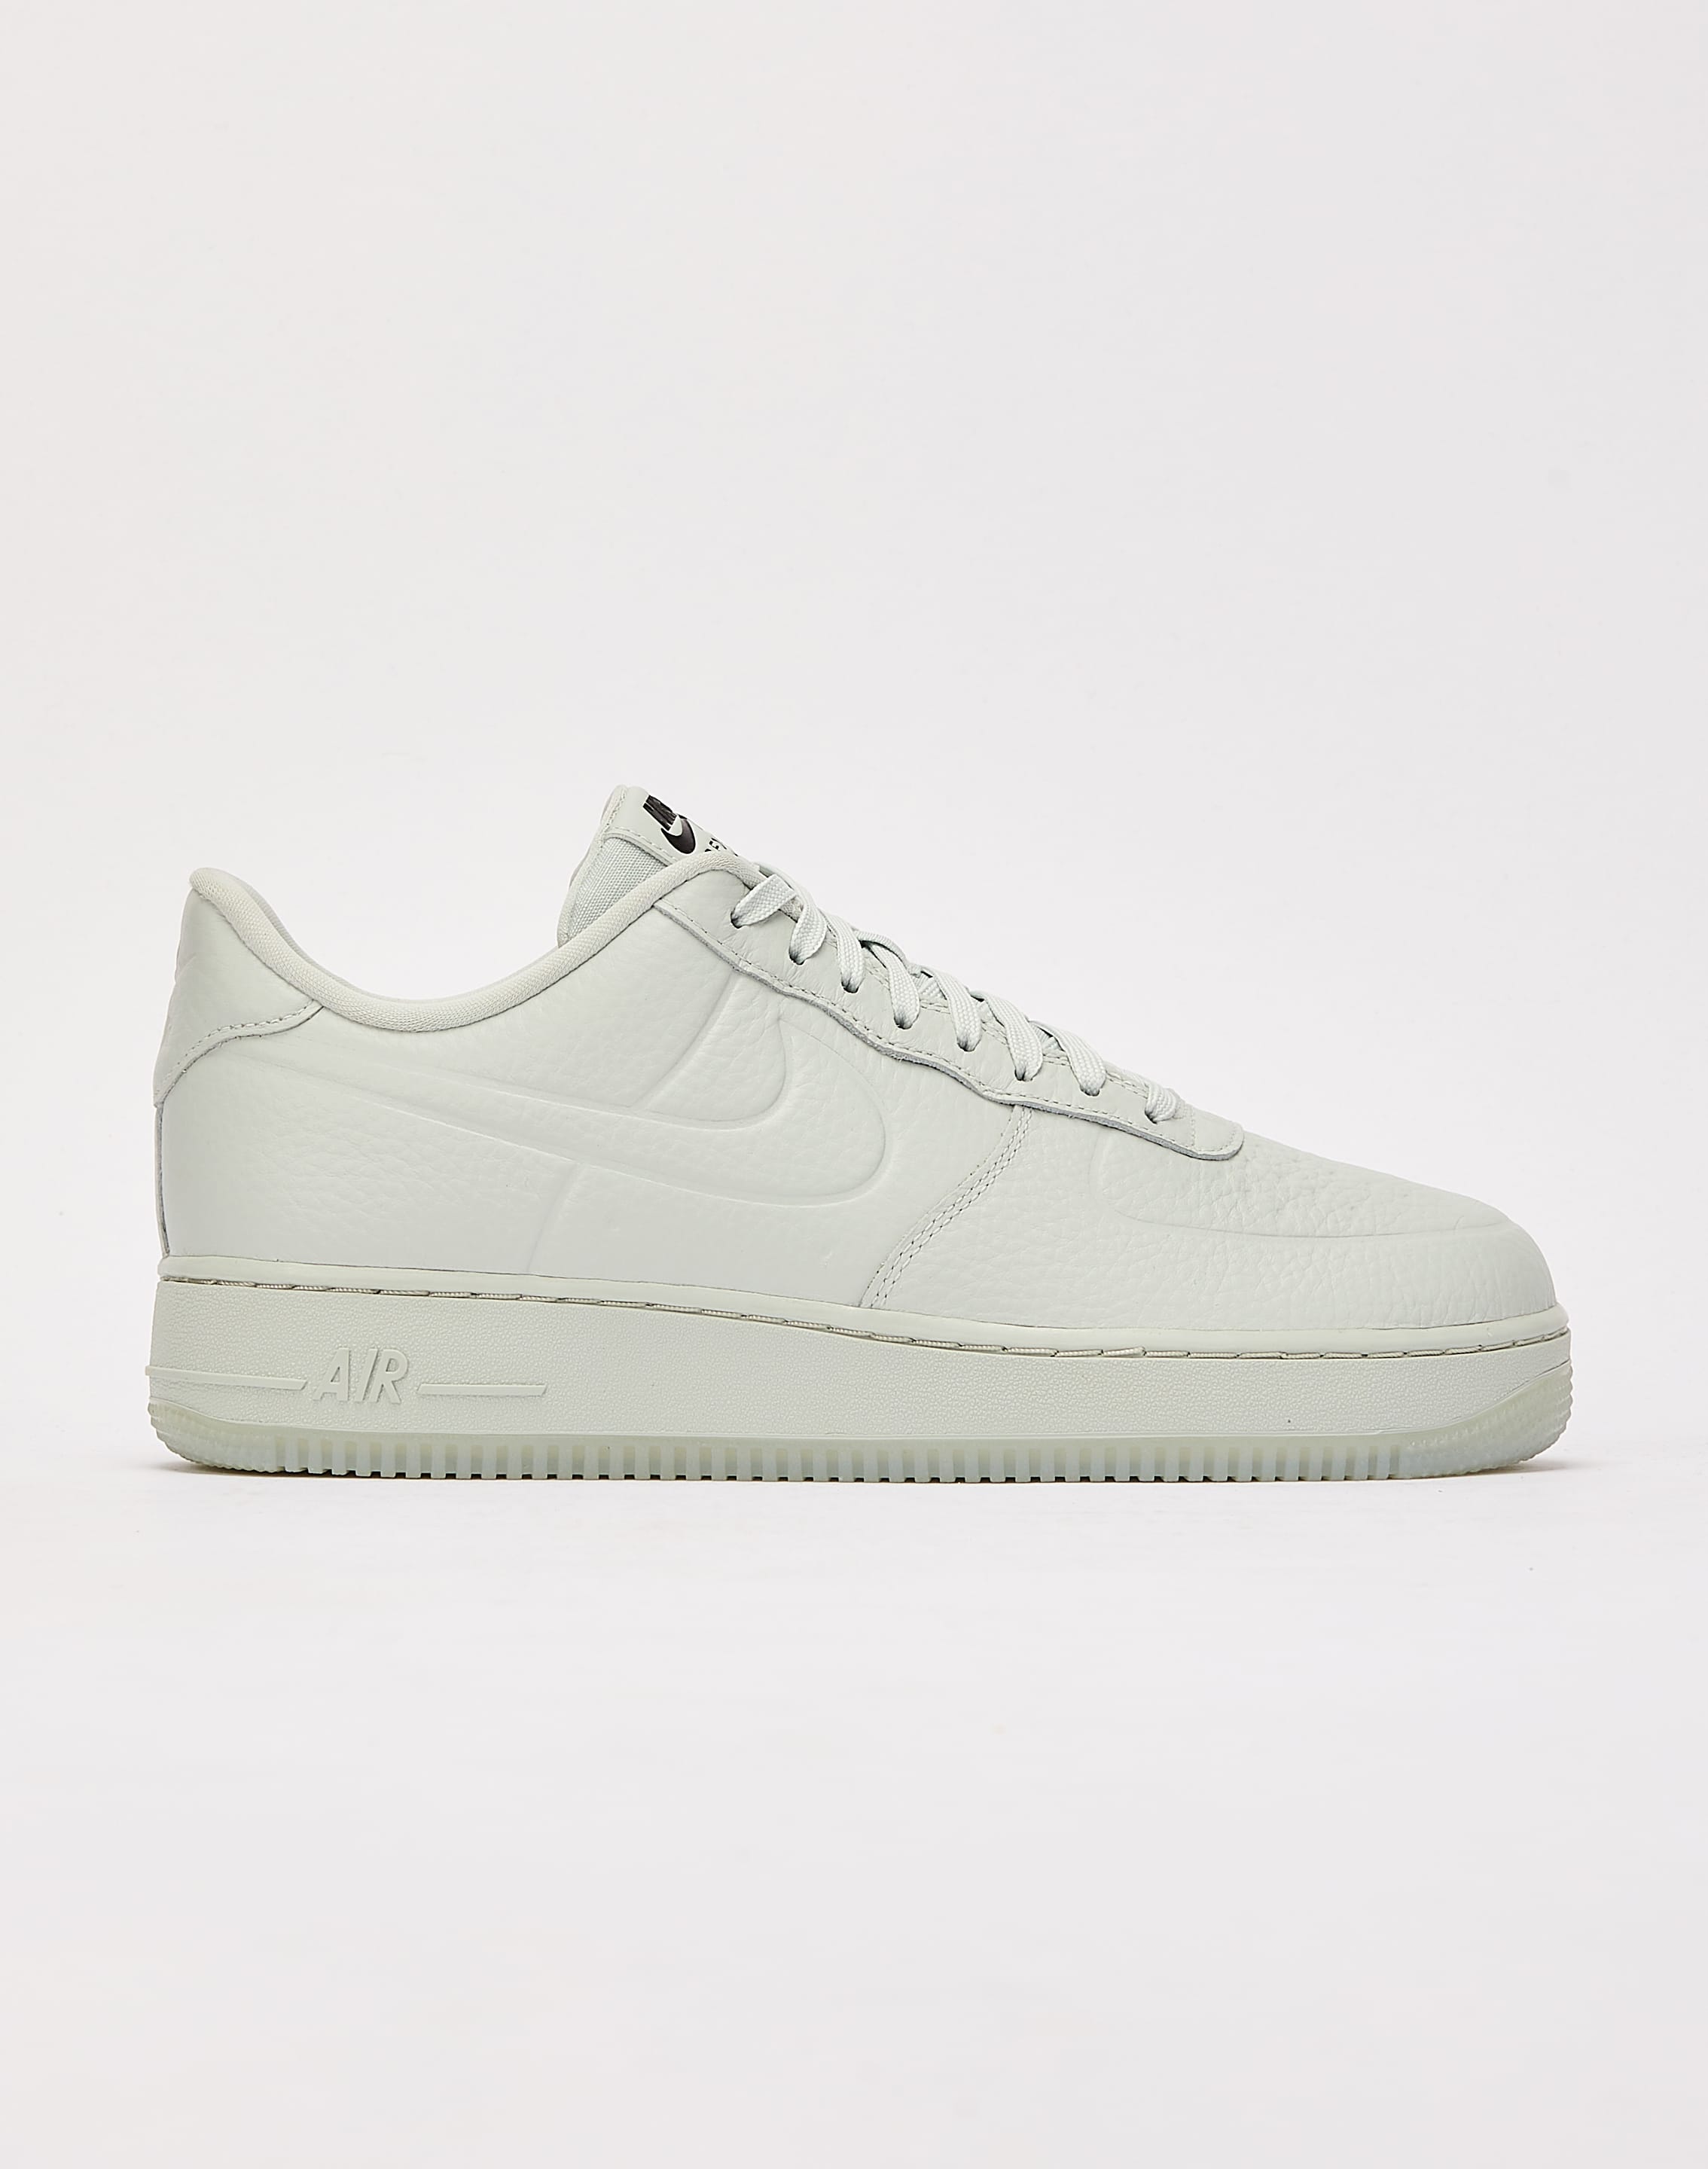 Shoes Nike AIR FORCE 1 07 